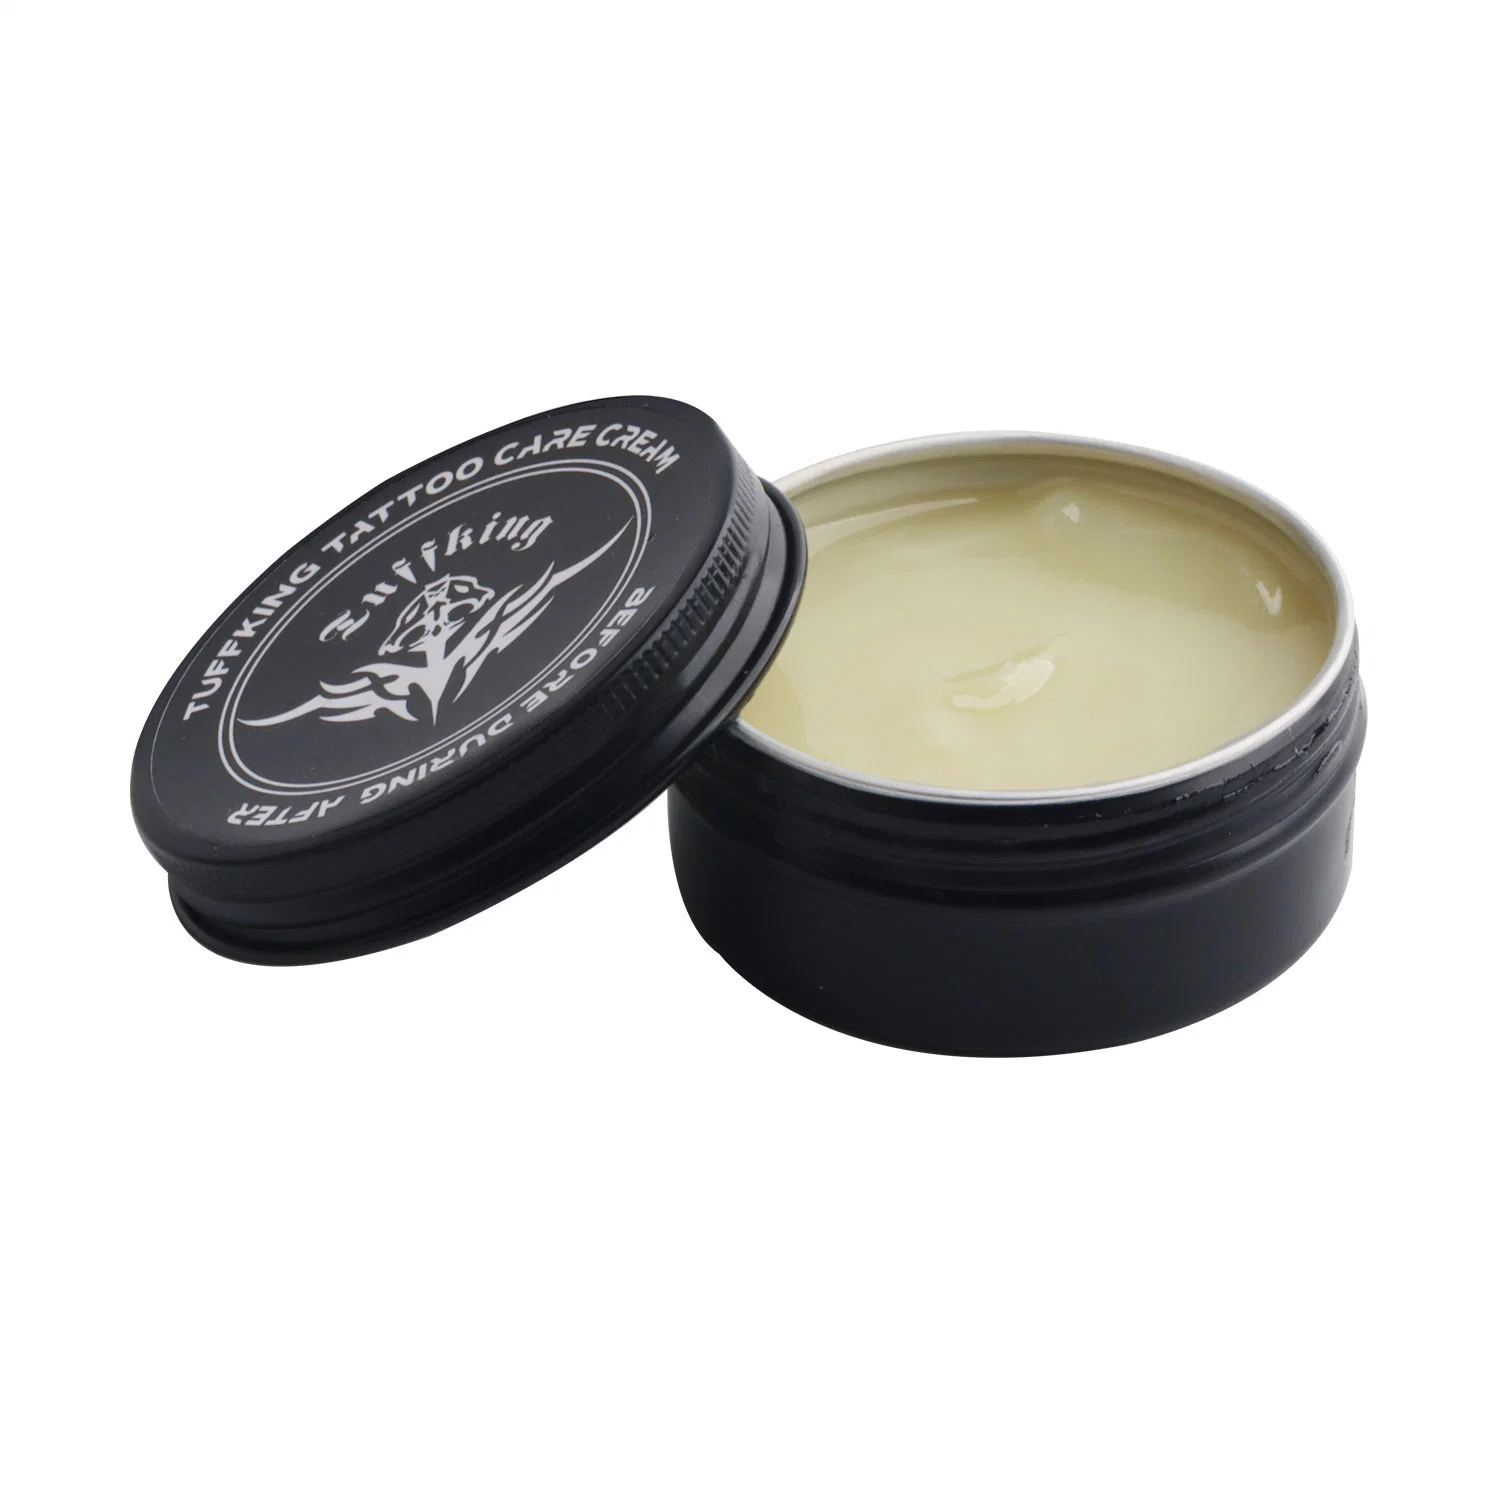 Tattoo Natural Care Healing Cream Tattoo Aftercare Balm Gel Tattoo Skin Repair Fast Recovery Ointment